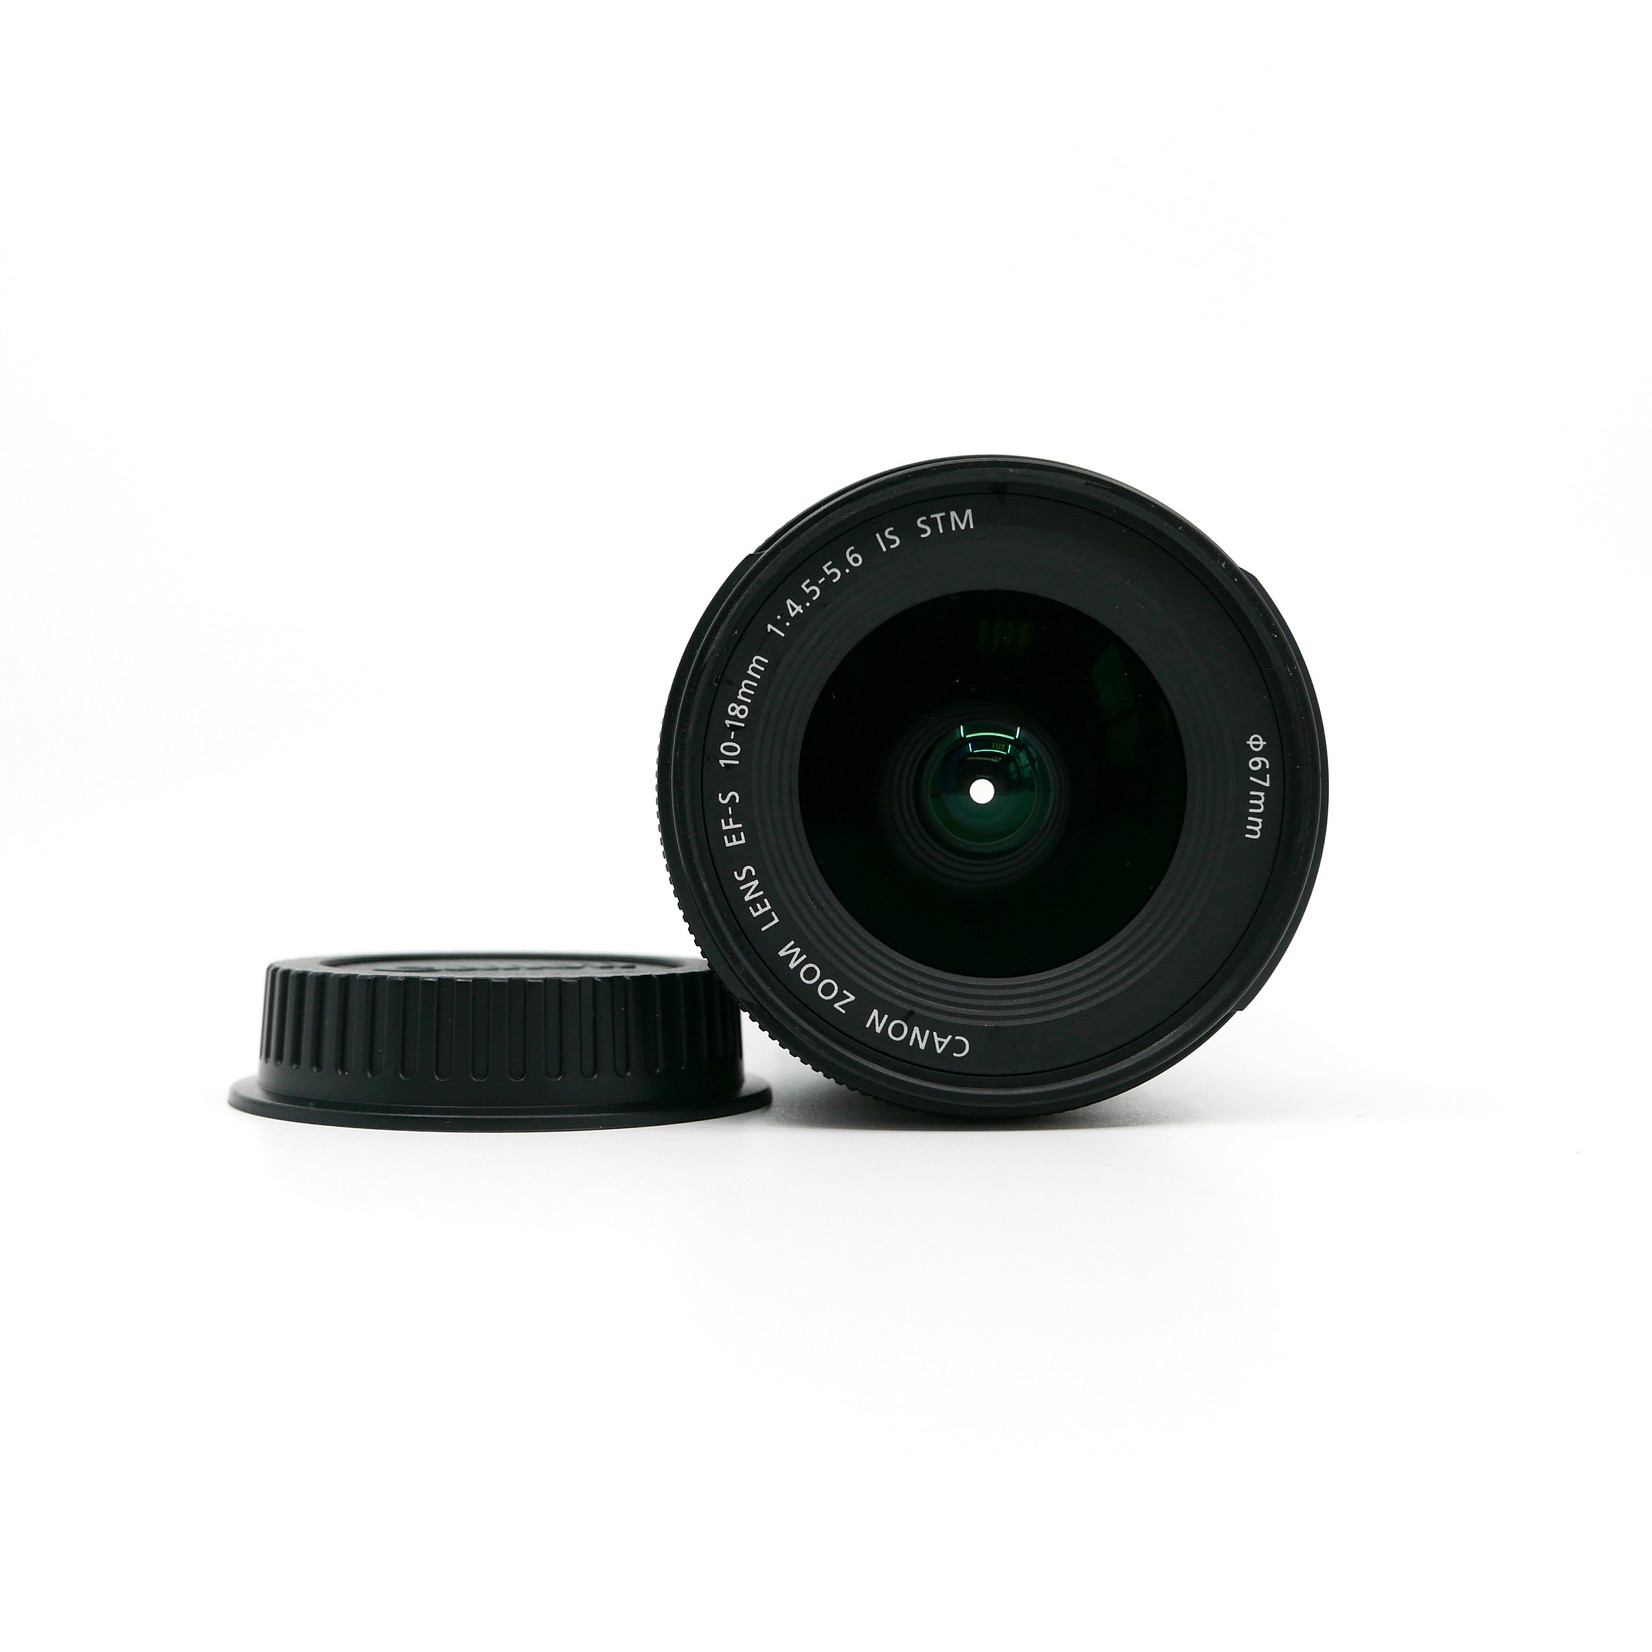 EF-S 10-18mm f:4.5-5.6 IS STM (Used) - Pro Photo